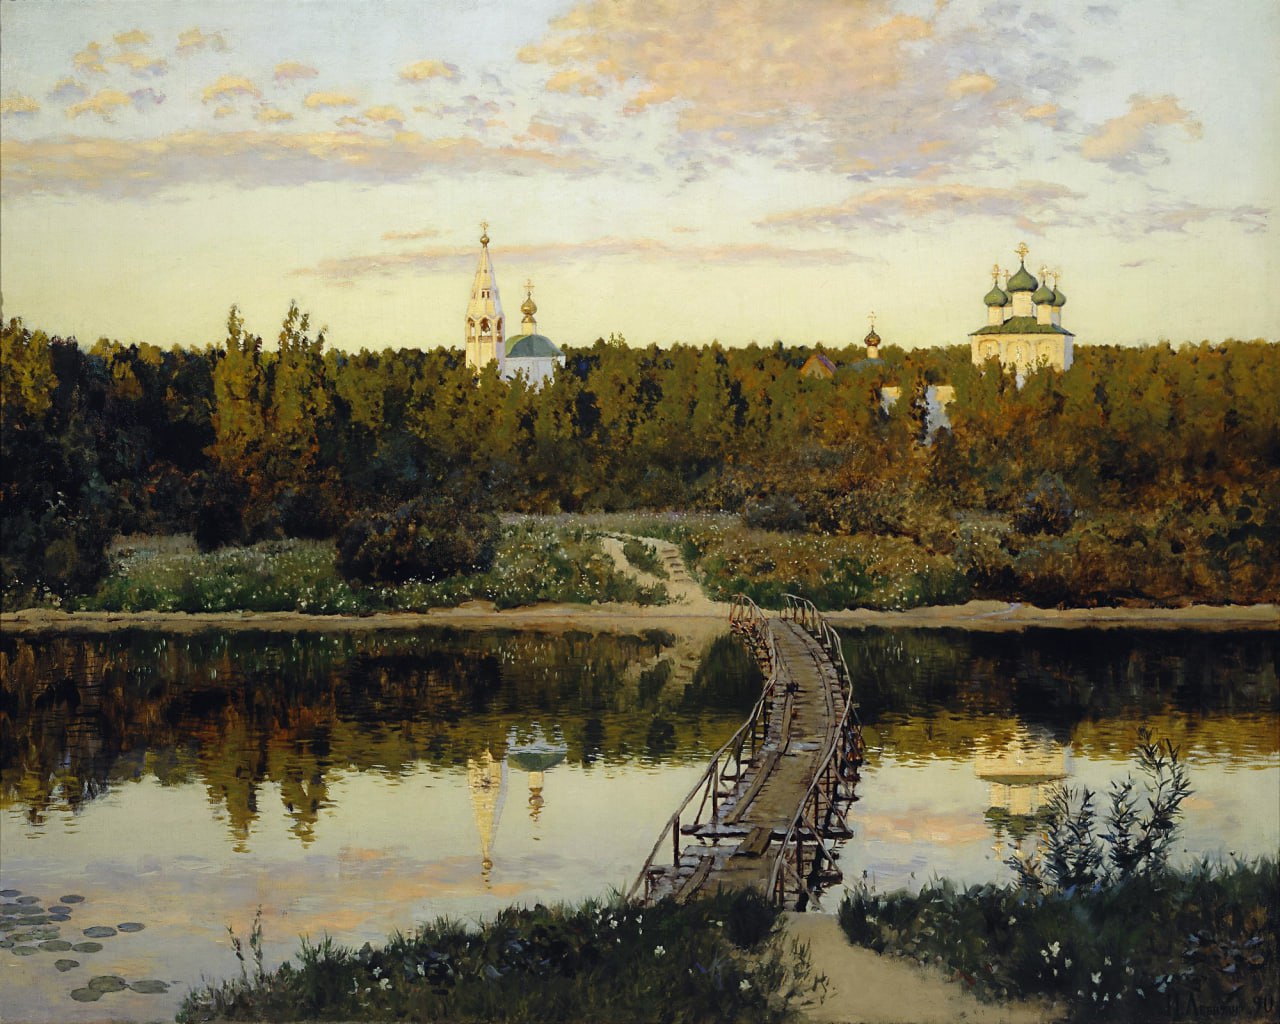 General 1280x1024 Isaac Ilyich Levitan traditional art water clouds sky artwork trees reflection nature bridge flowers